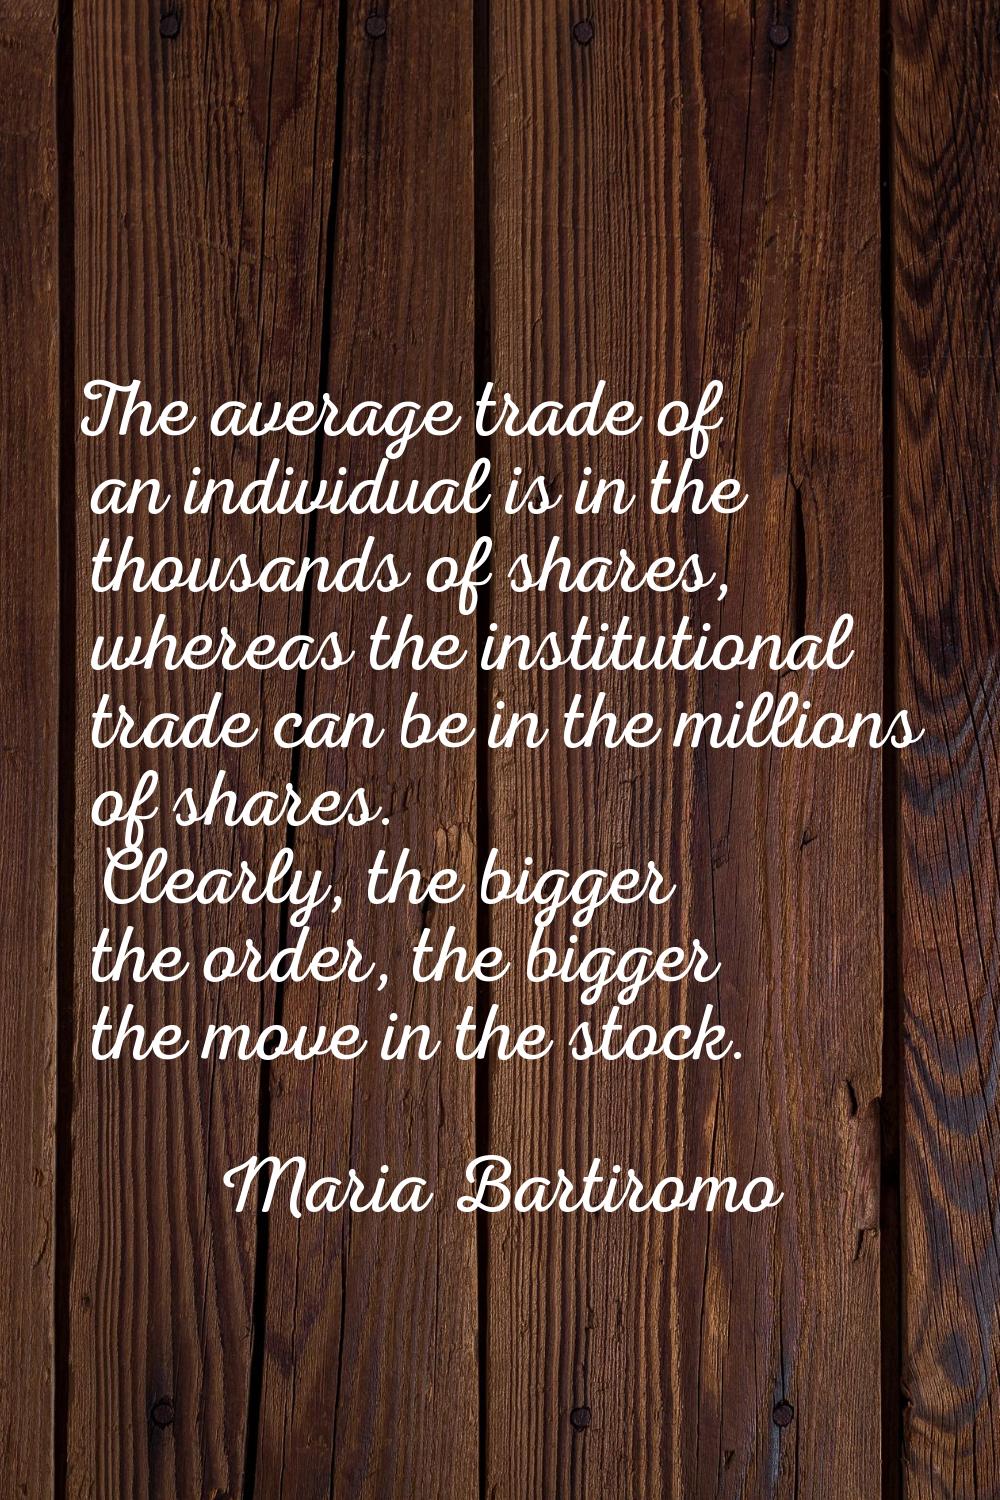 The average trade of an individual is in the thousands of shares, whereas the institutional trade c